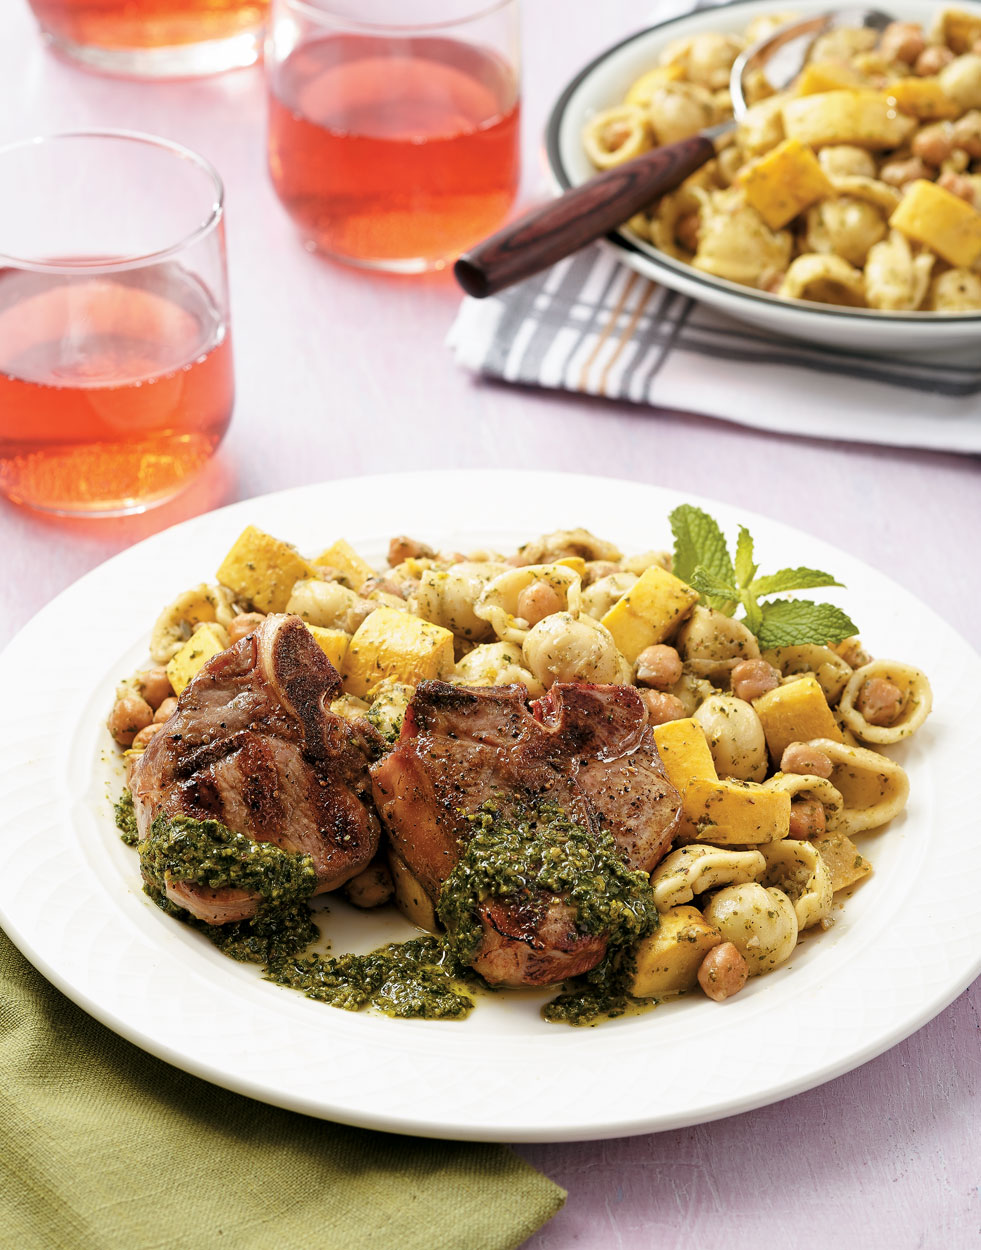 Grilled Lamb Chops with Mint Pesto Recipe